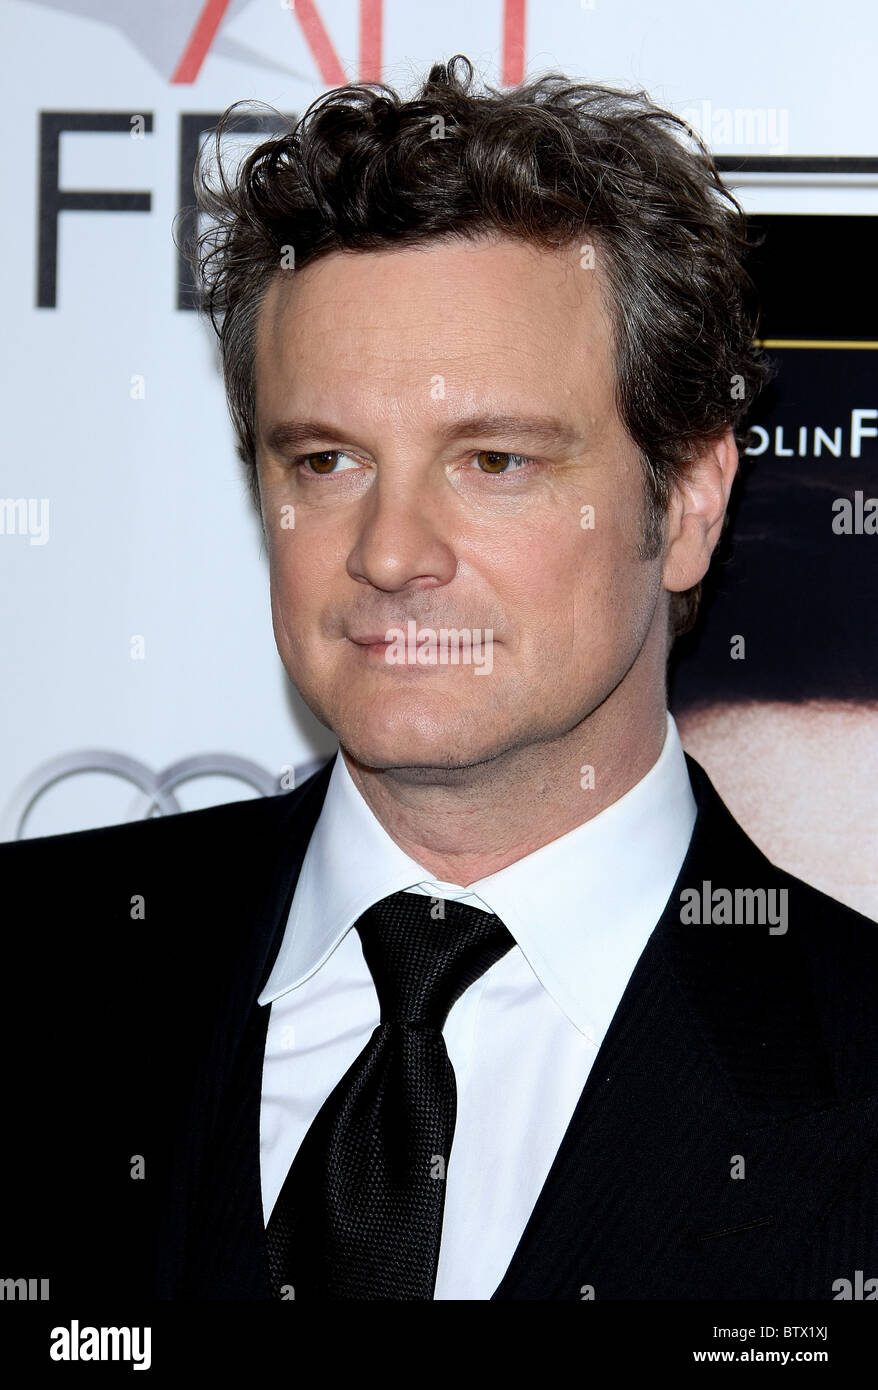 COLIN FIRTH THE KING'S SPEECH ENSEMBLE TRIBUTE. AFI FEST 2010 HOLLYWOOD LOS ANGELES CALIFORNIA USA 05 November 2010 Stock Photo